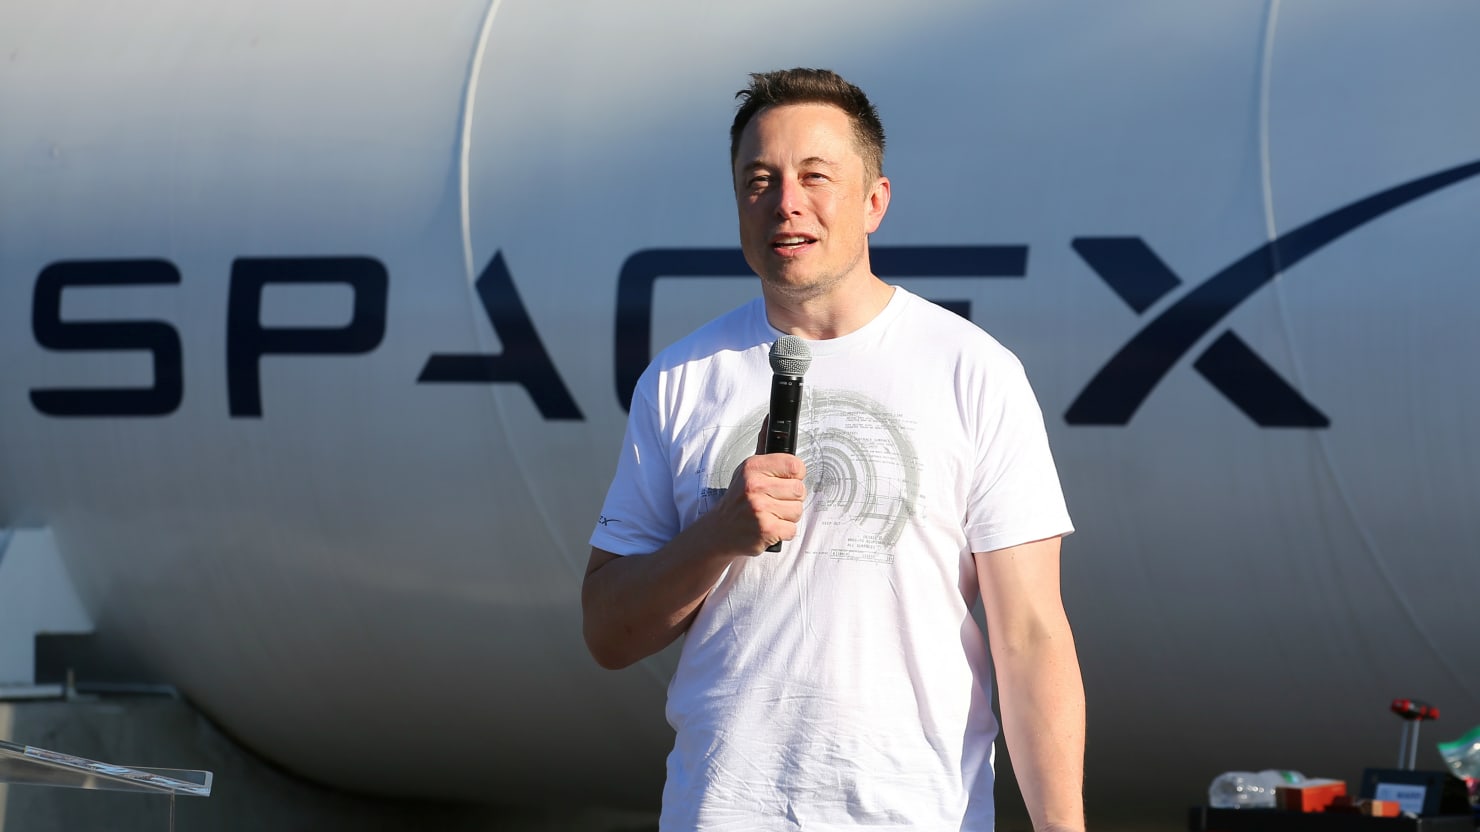 Elon Musk: SpaceX Can Colonize Mars, Build Moon Base - The ...